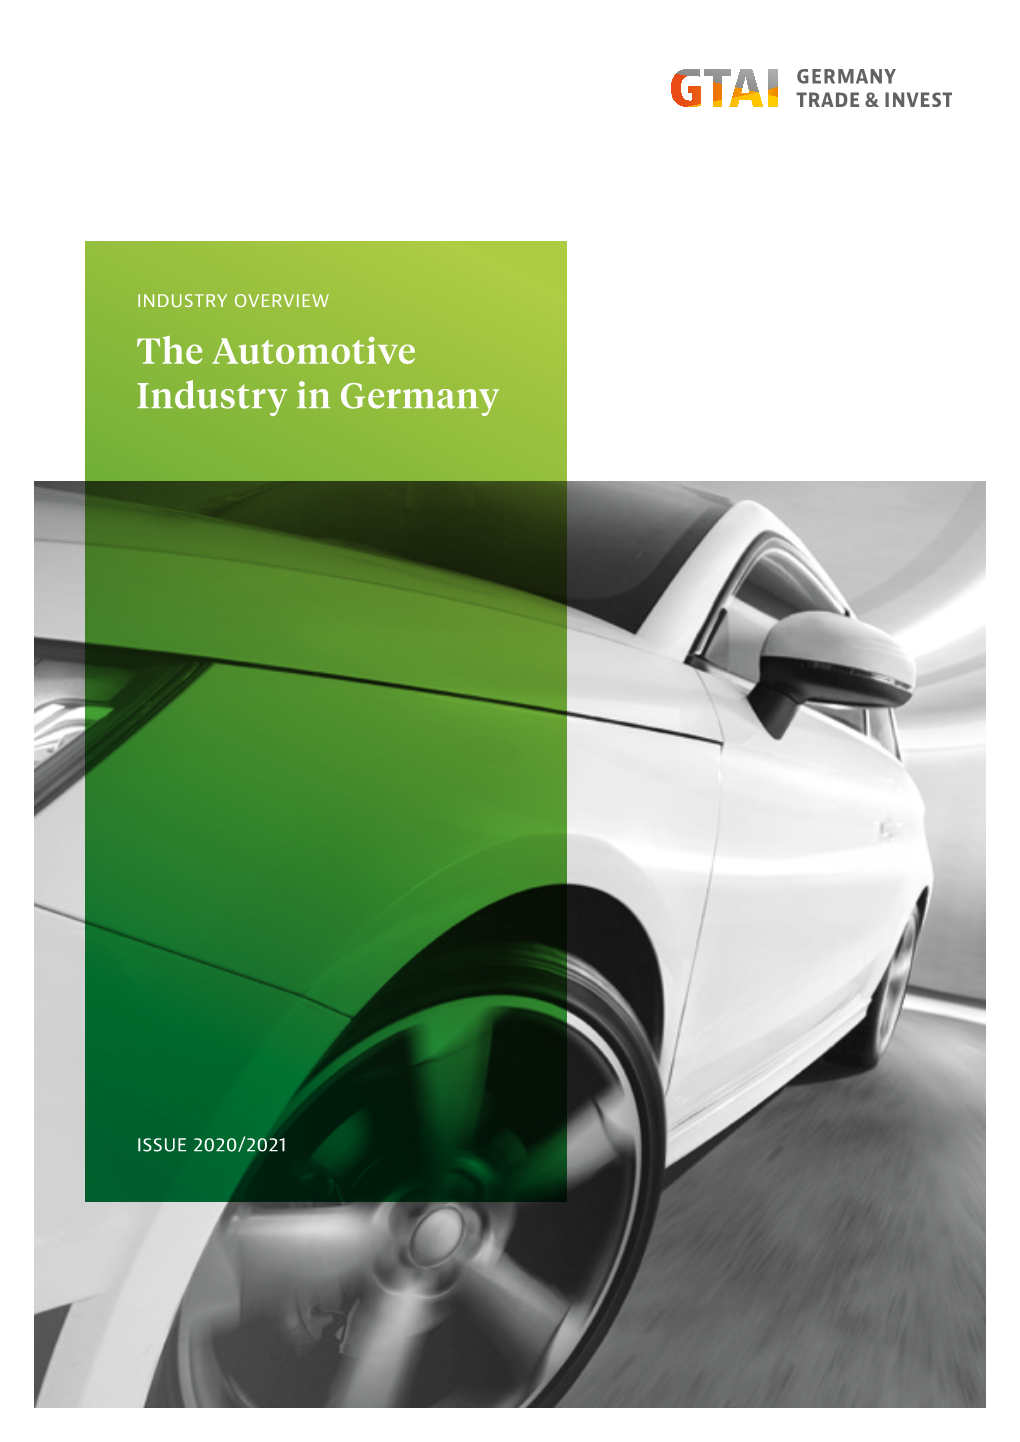 The Automotive Industry in Germany